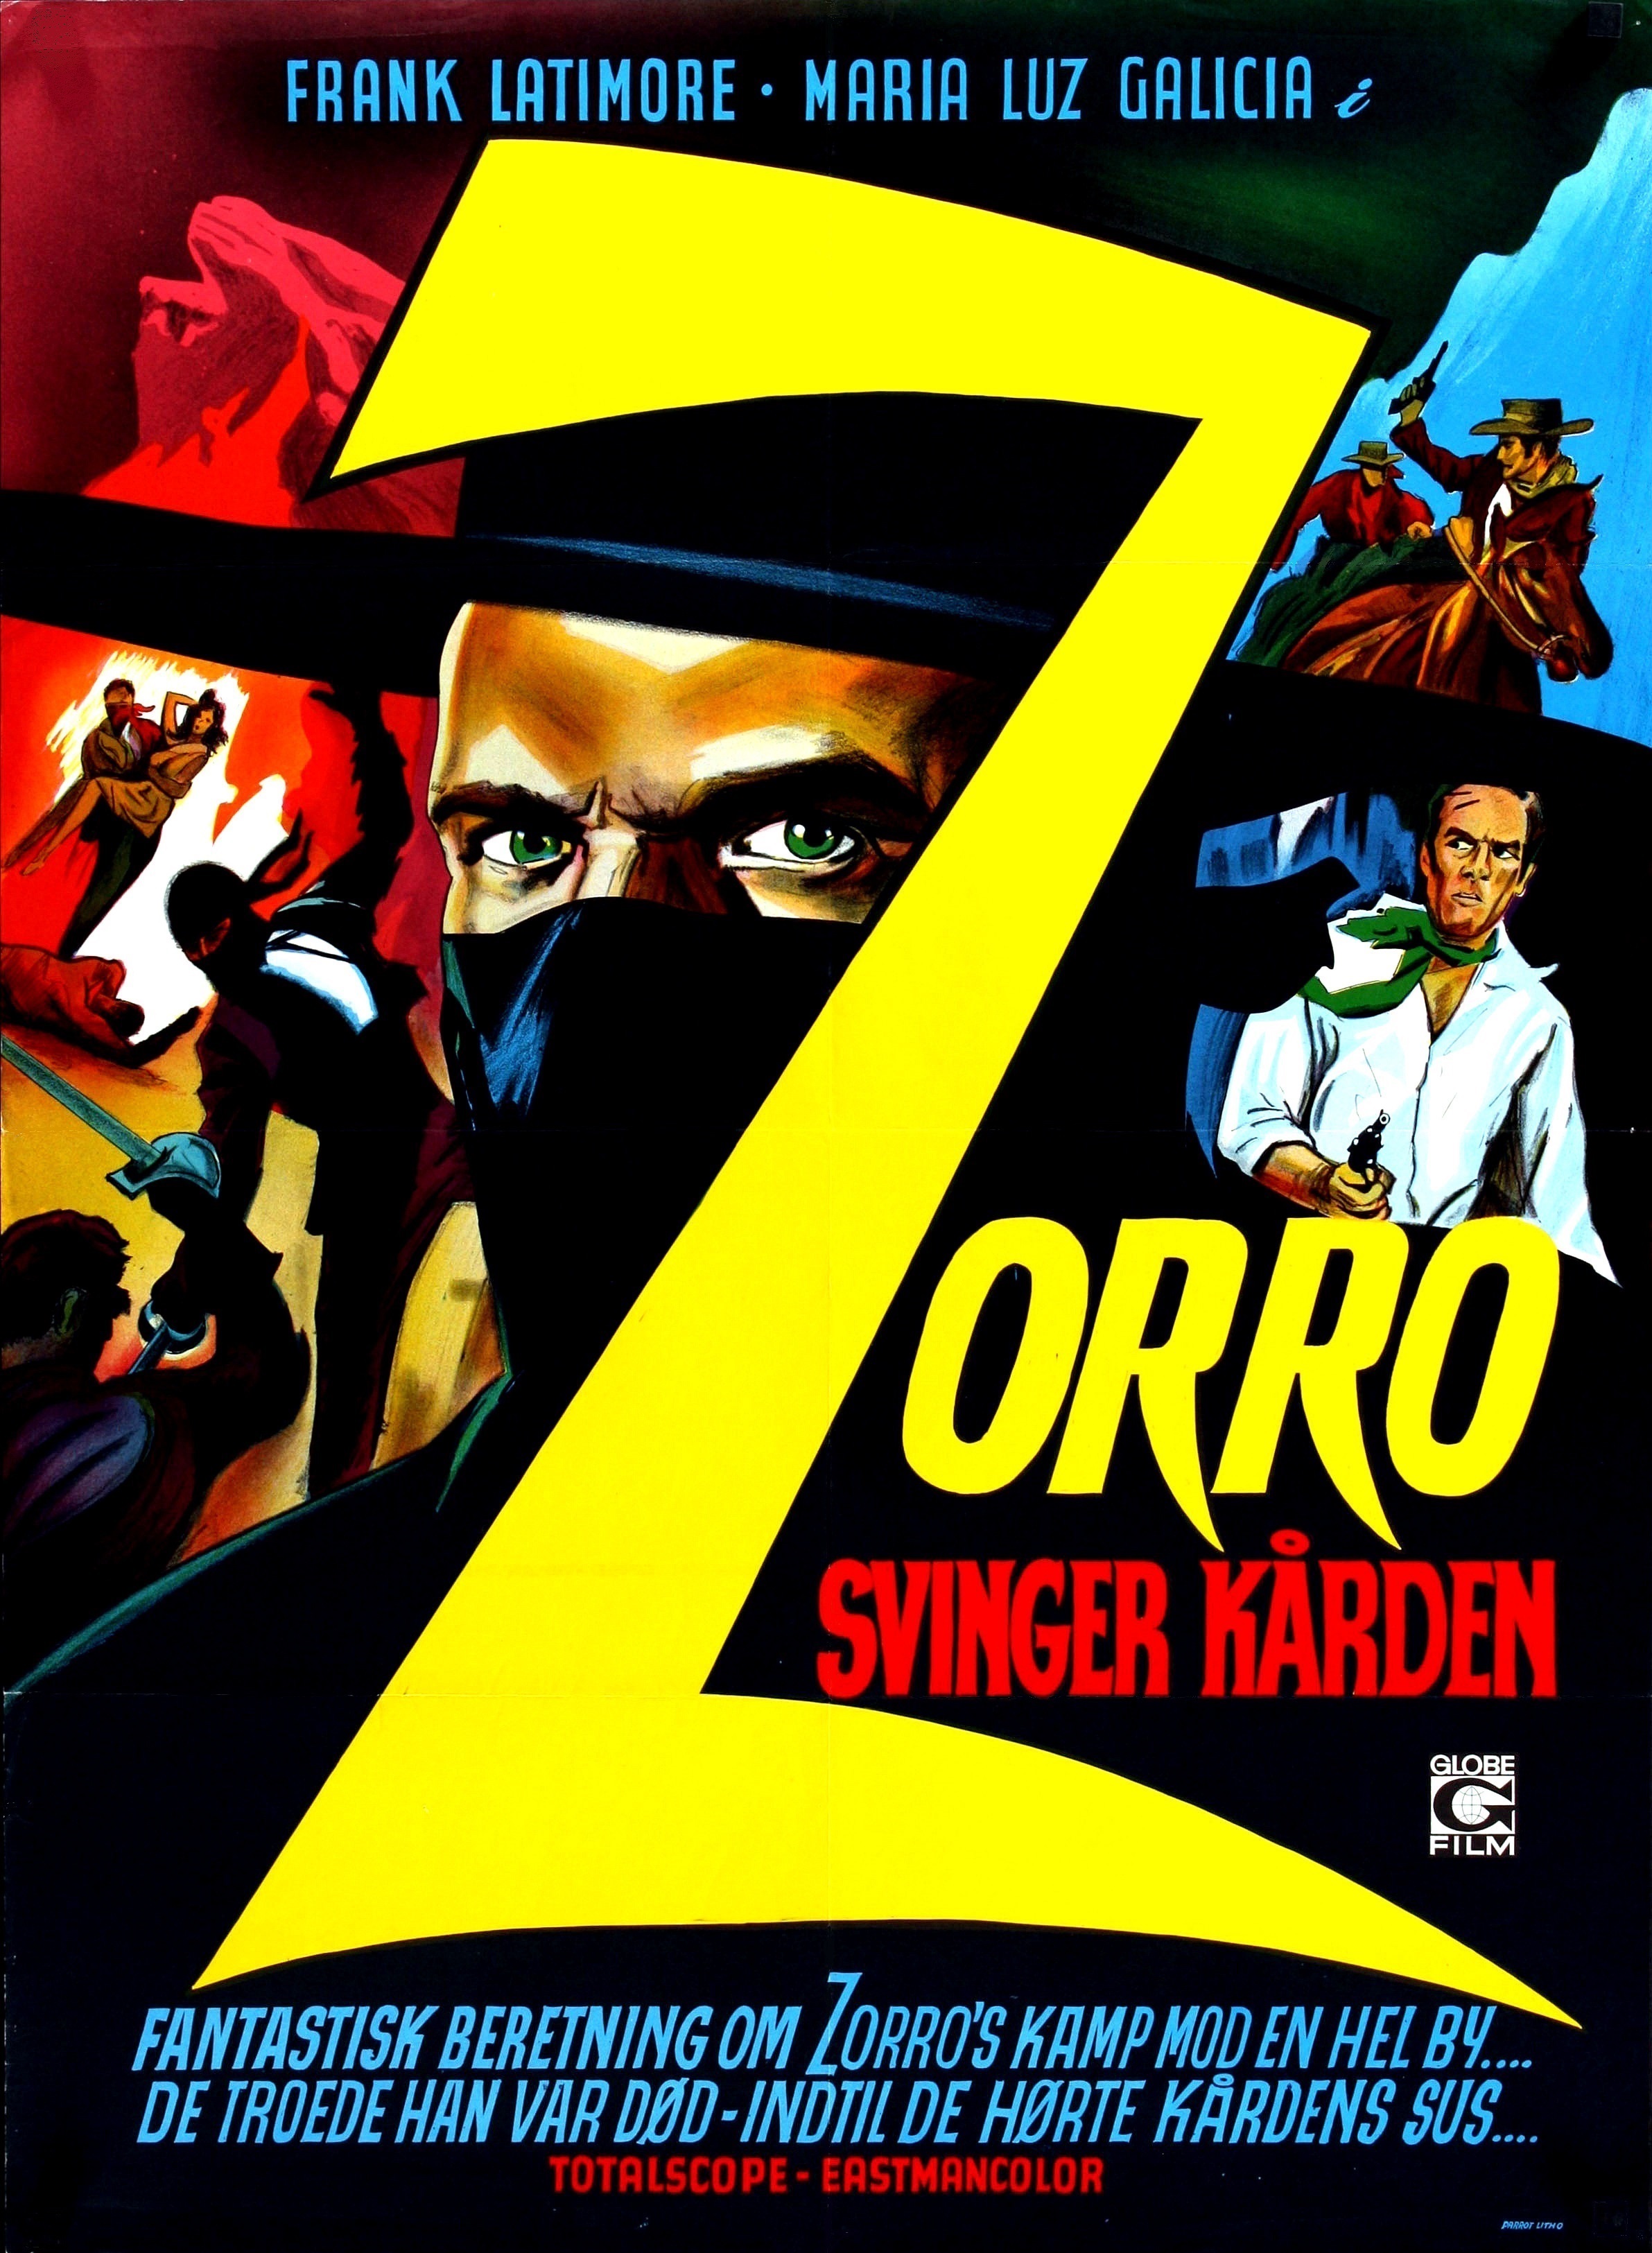 Zorro the Avenger (1962) with English Subtitles on DVD on DVD